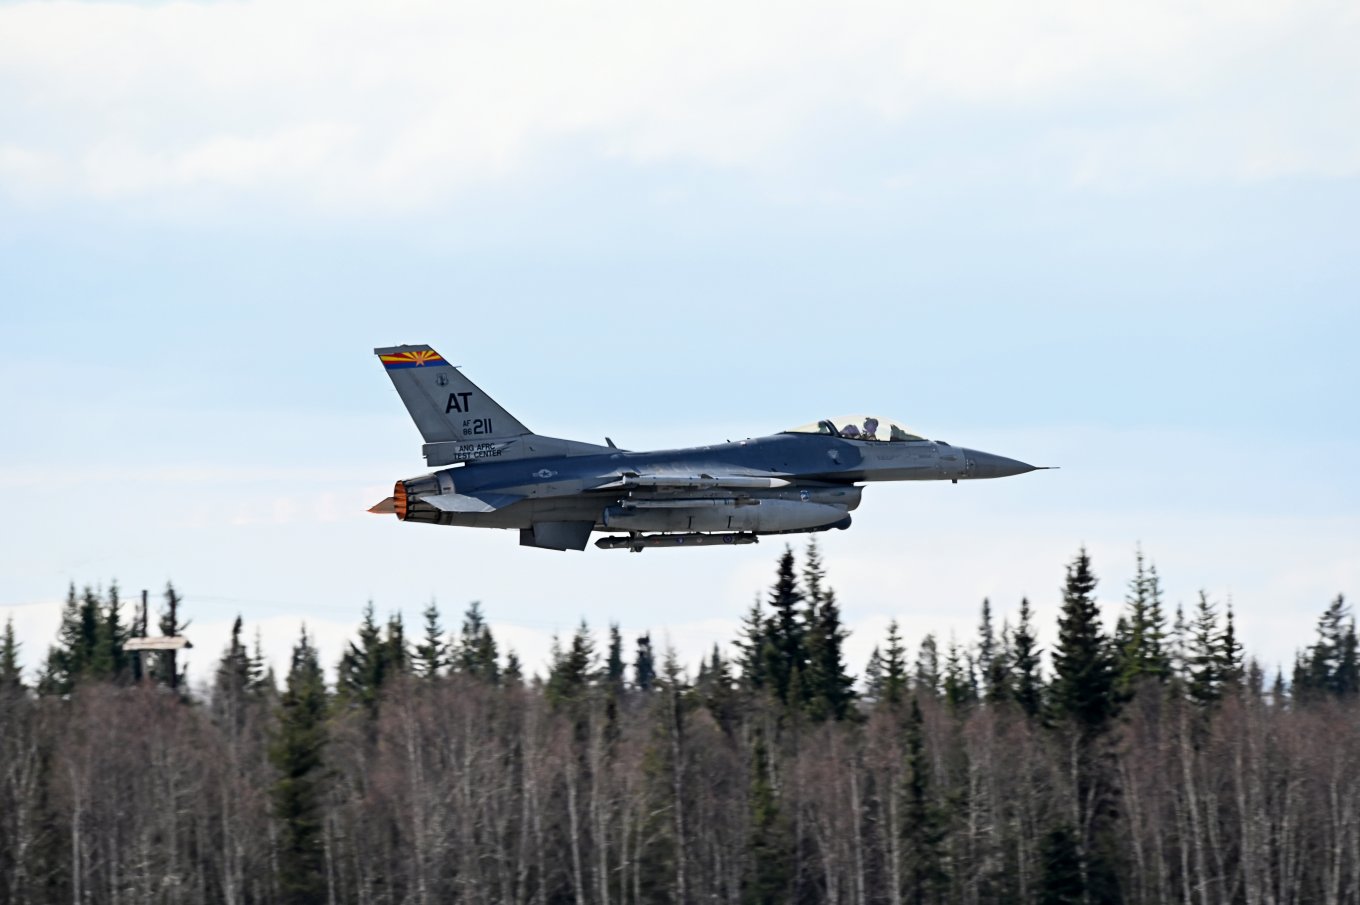 An F-16 Fighting Falcon aircraft launch, Alaska, May 9, Northern Edge 2023 Defense Express U.S. Tested Angry Kitten EW System on F-16 and A-10A Aircraft, Tanker Intelligent Gateway on KC-135R Tanker, and Upgraded MQ-9 Reaper UAV